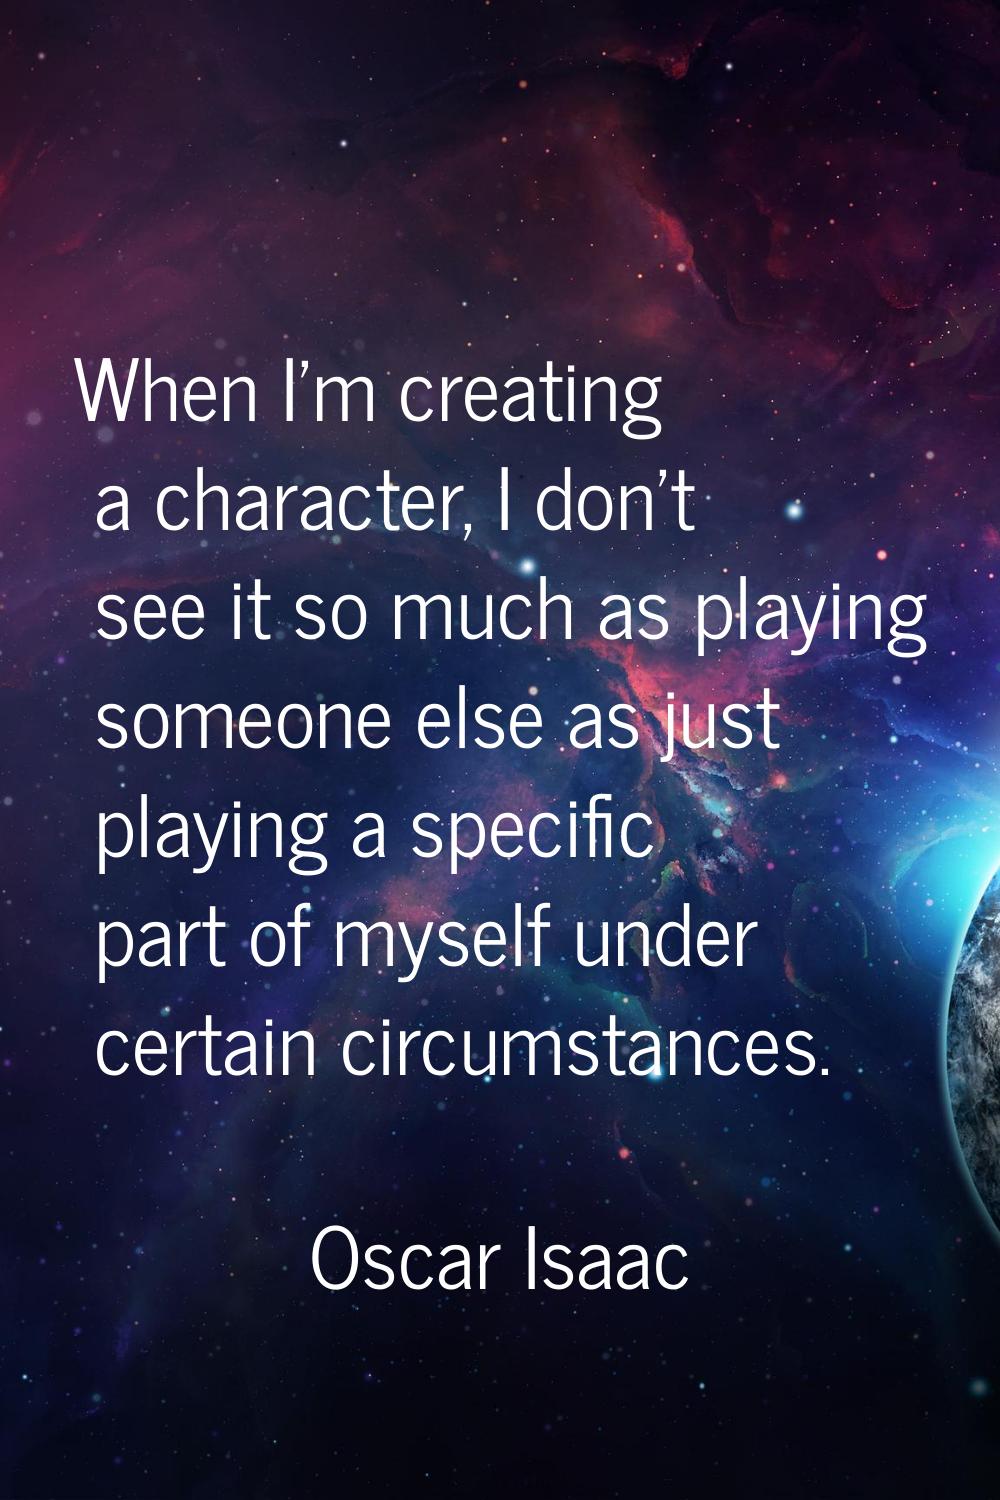 When I'm creating a character, I don't see it so much as playing someone else as just playing a spe